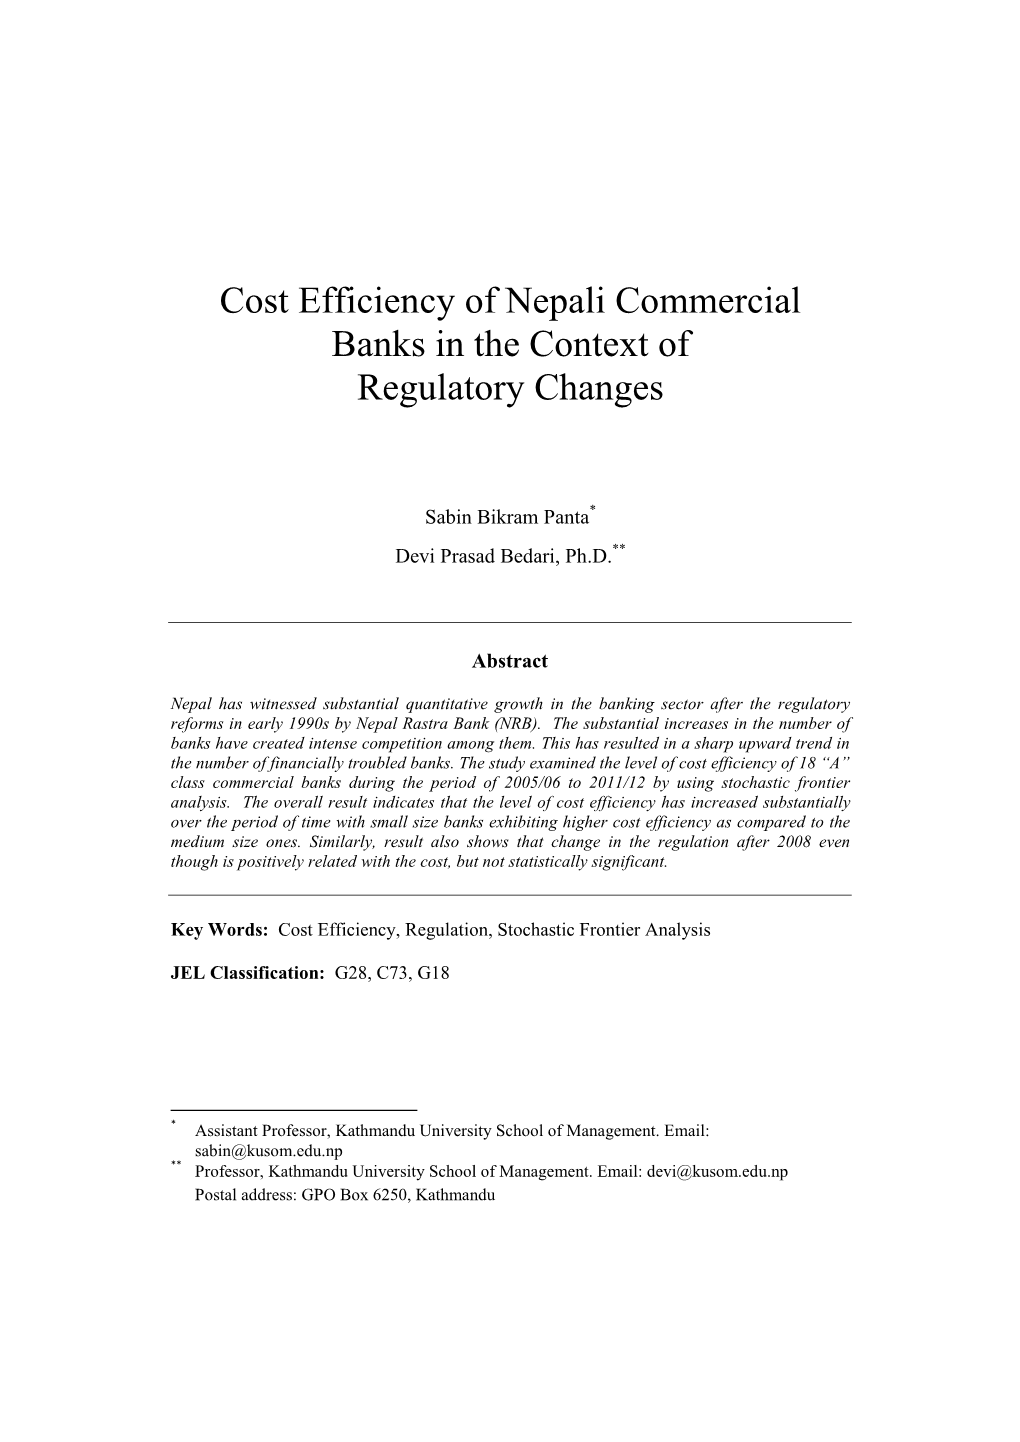 Cost Efficiency of Nepali Commercial Banks in the Context of Regulatory Changes